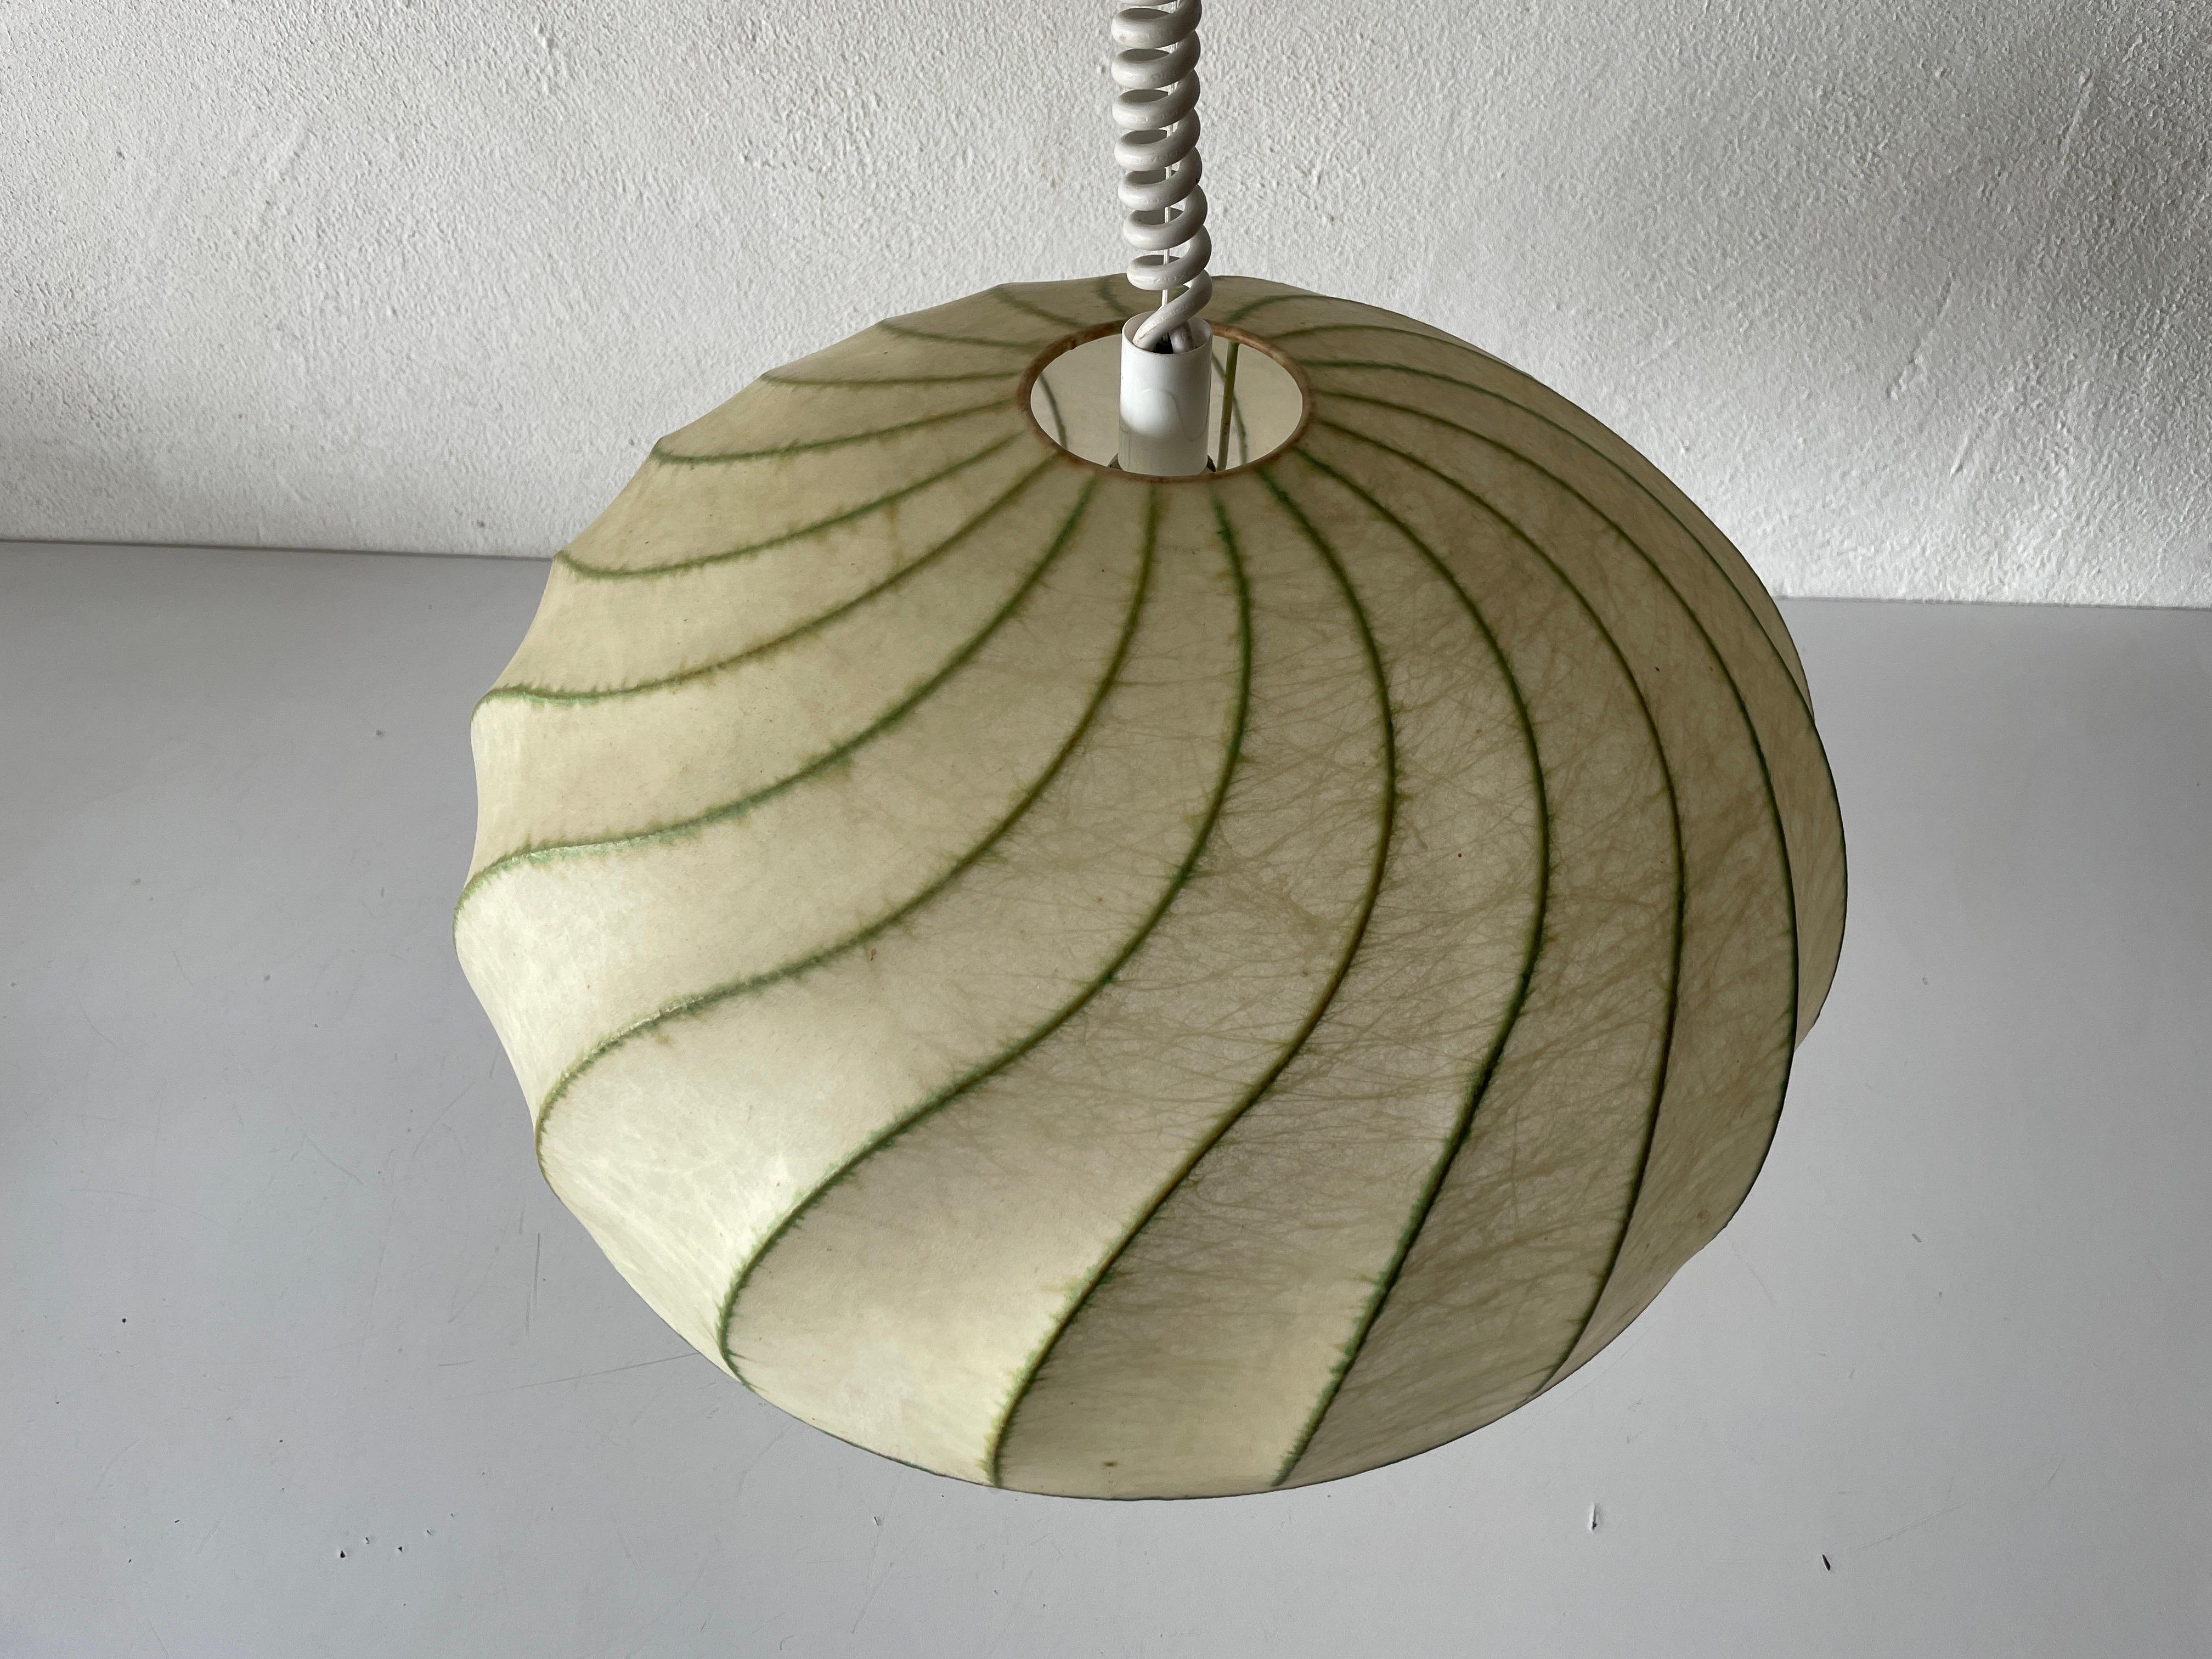 Cocoon Pendant Lamp by Goldkant, 1960s, Germany

Achille Castiglioni Era
1960s Germany.

Lampshade is in very good vintage condition.

This lamp works with E27 light bulbs. 
Wired and suitable to use with 220V and 110V for all